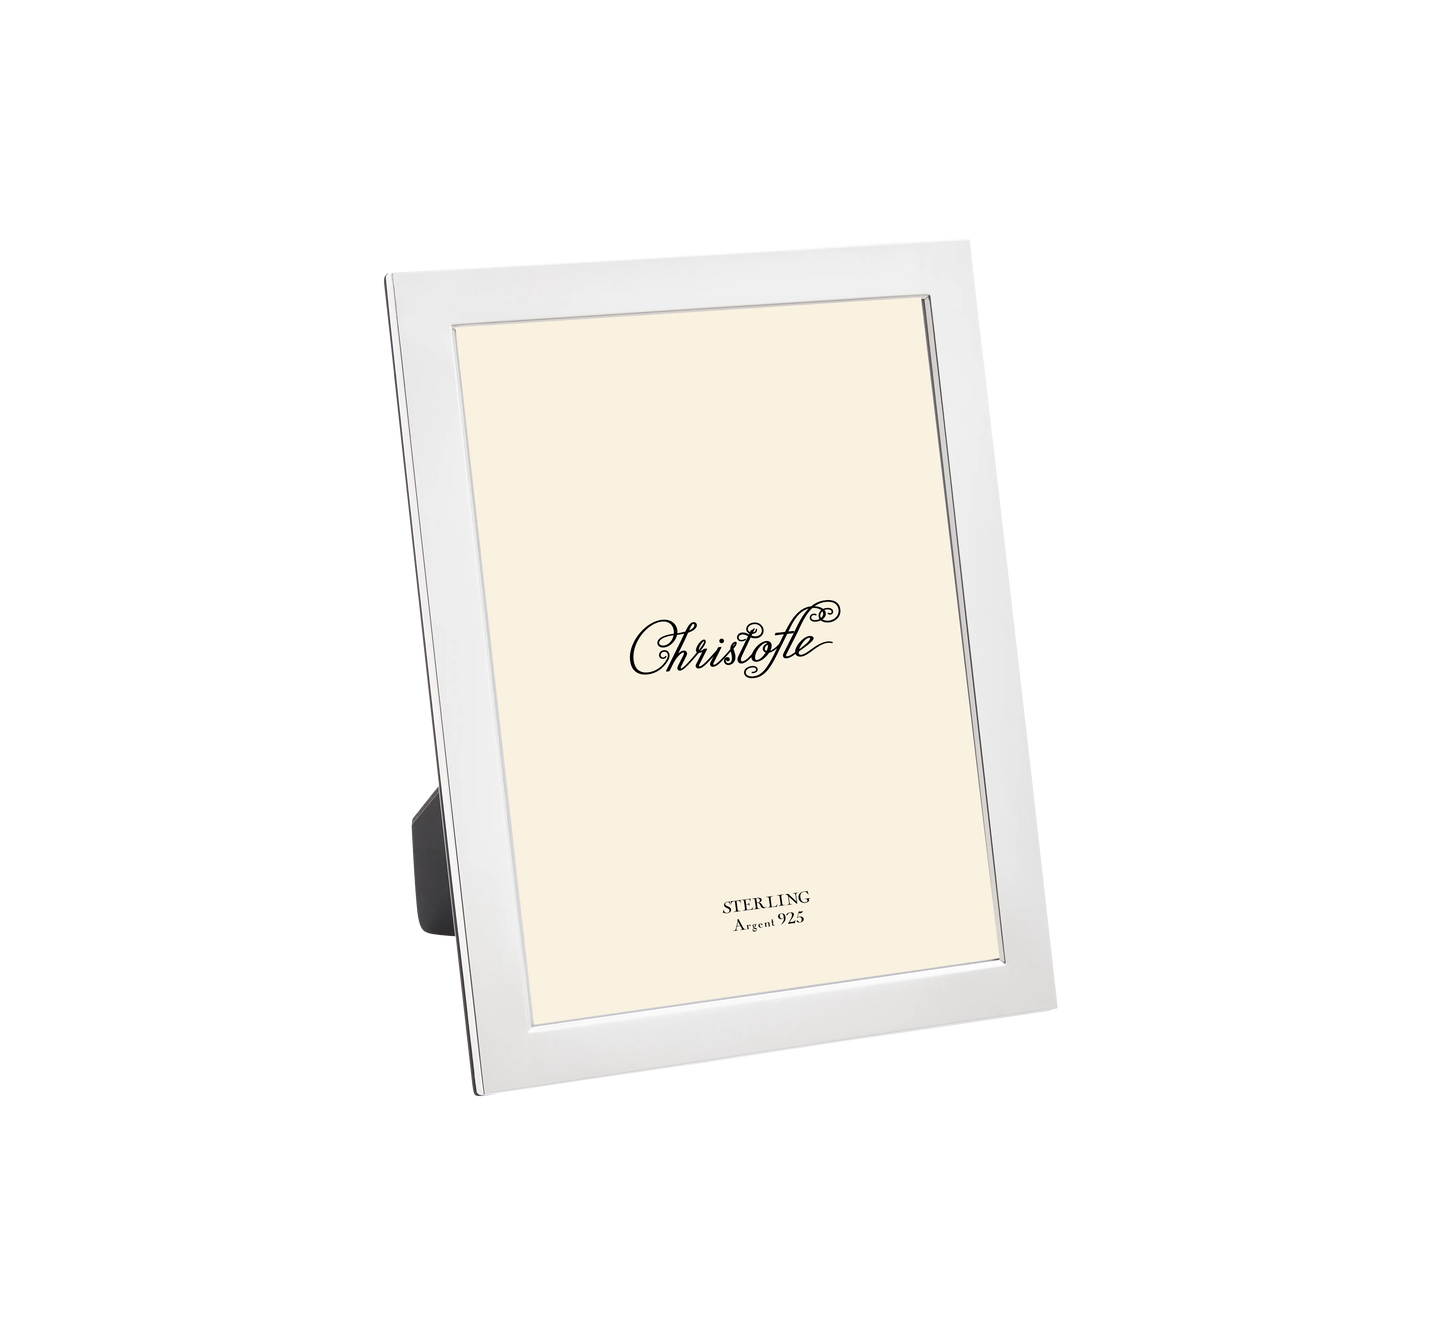 Christofle Picture frame 7"x9.5" (18x24 cm) Fidelio Silver plated